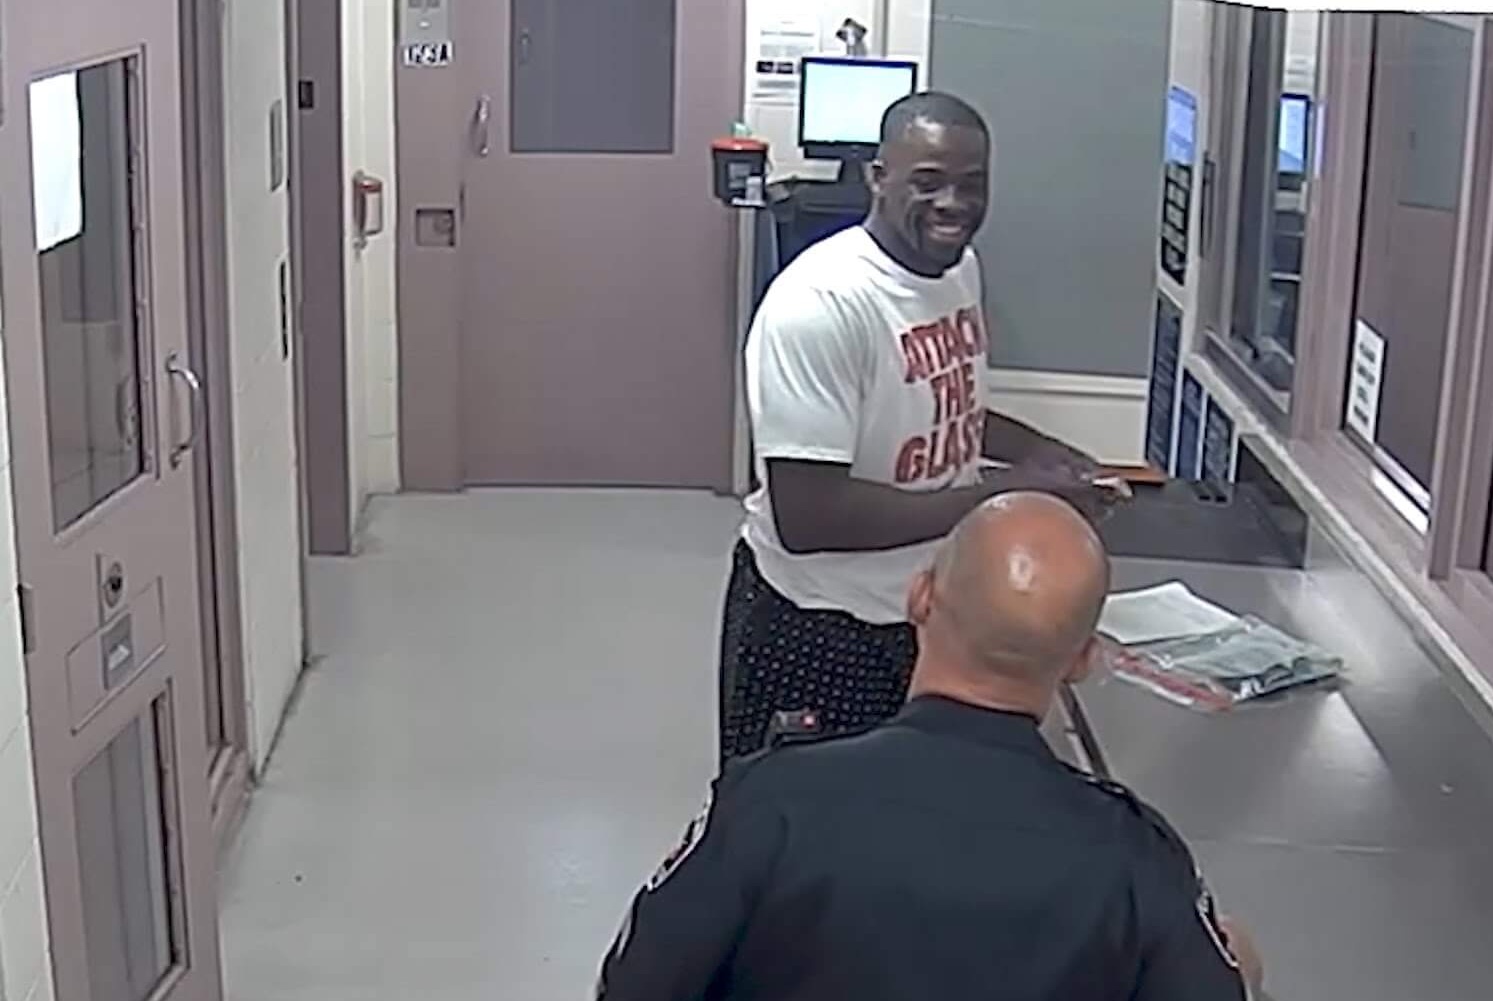 Draymond Green uses cellphone, jokes with officers in booking video